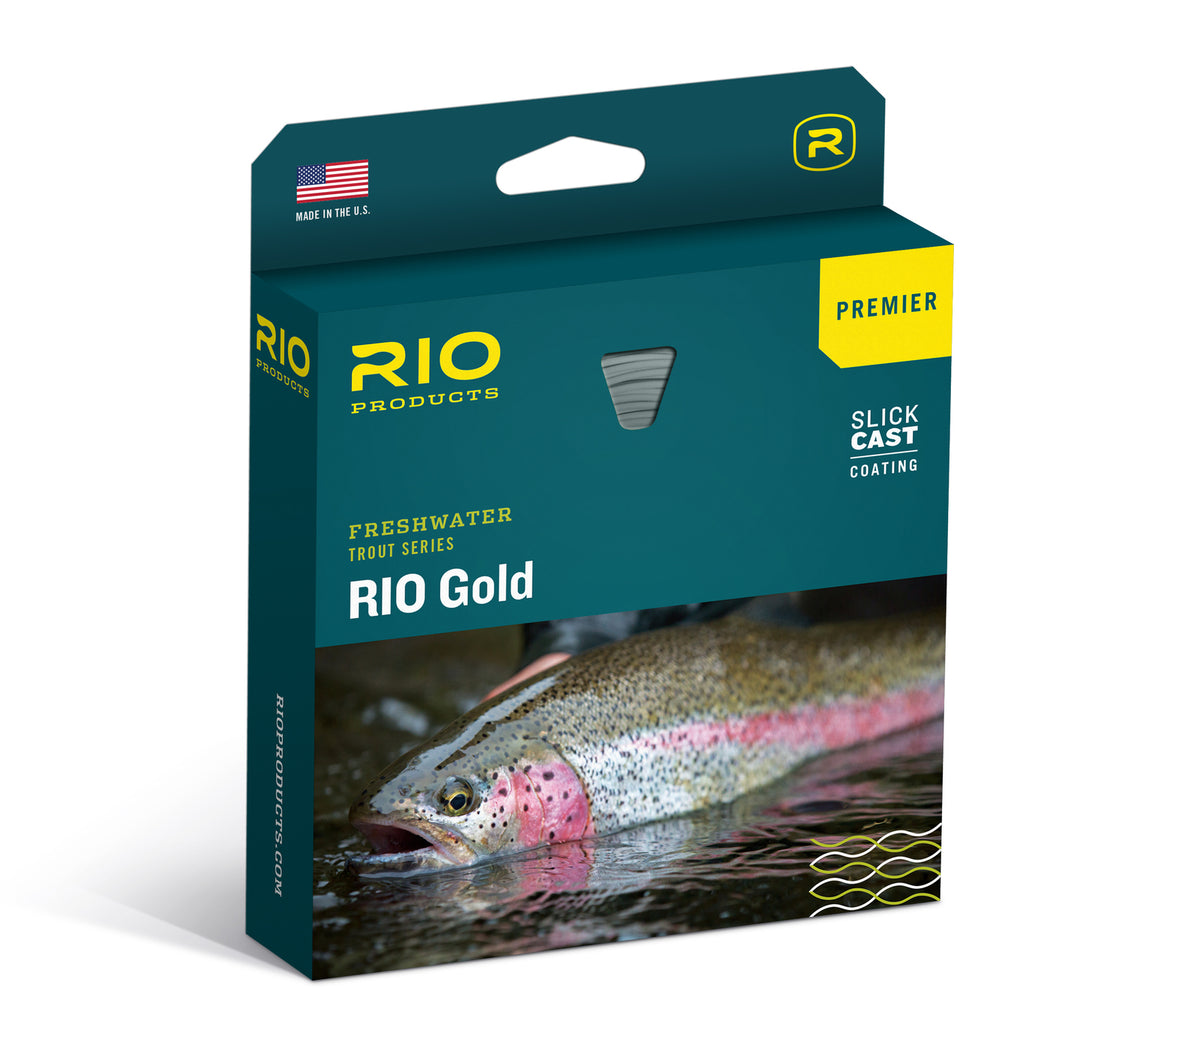 Premier RIO Gold Fly Line – Guide Flyfishing, Fly Fishing Rods, Reels, Sage, Redington, RIO